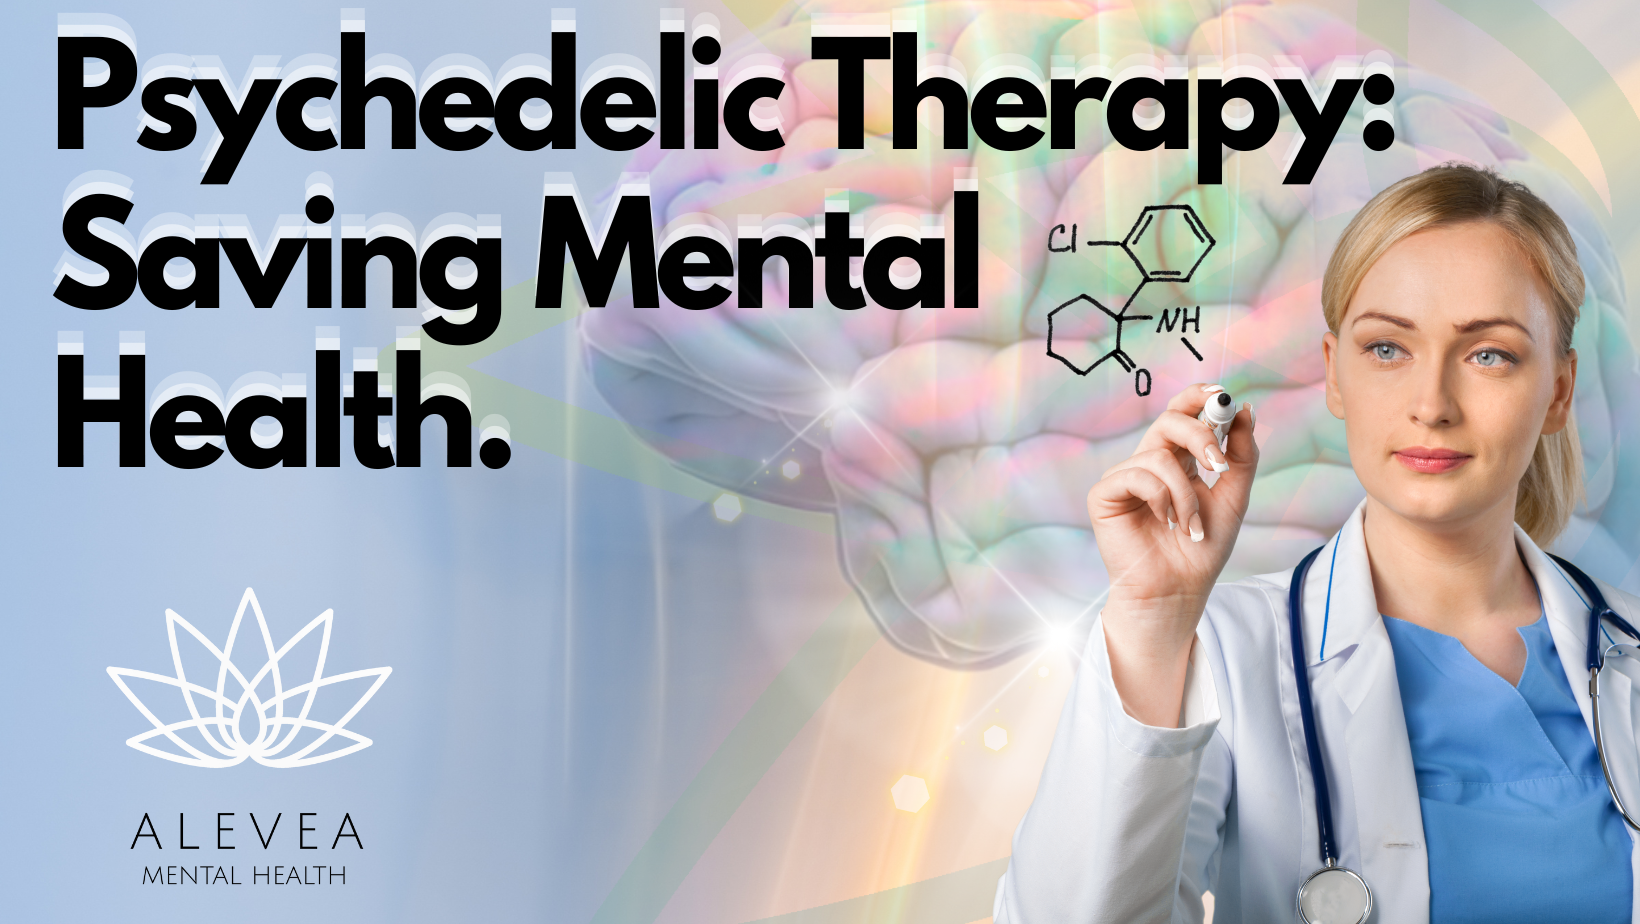 Alevea Mental Health Advocates for Psychedelic Therapy, Citing MAPS' Latest Research and Its Own Success with Ketamine Treatment